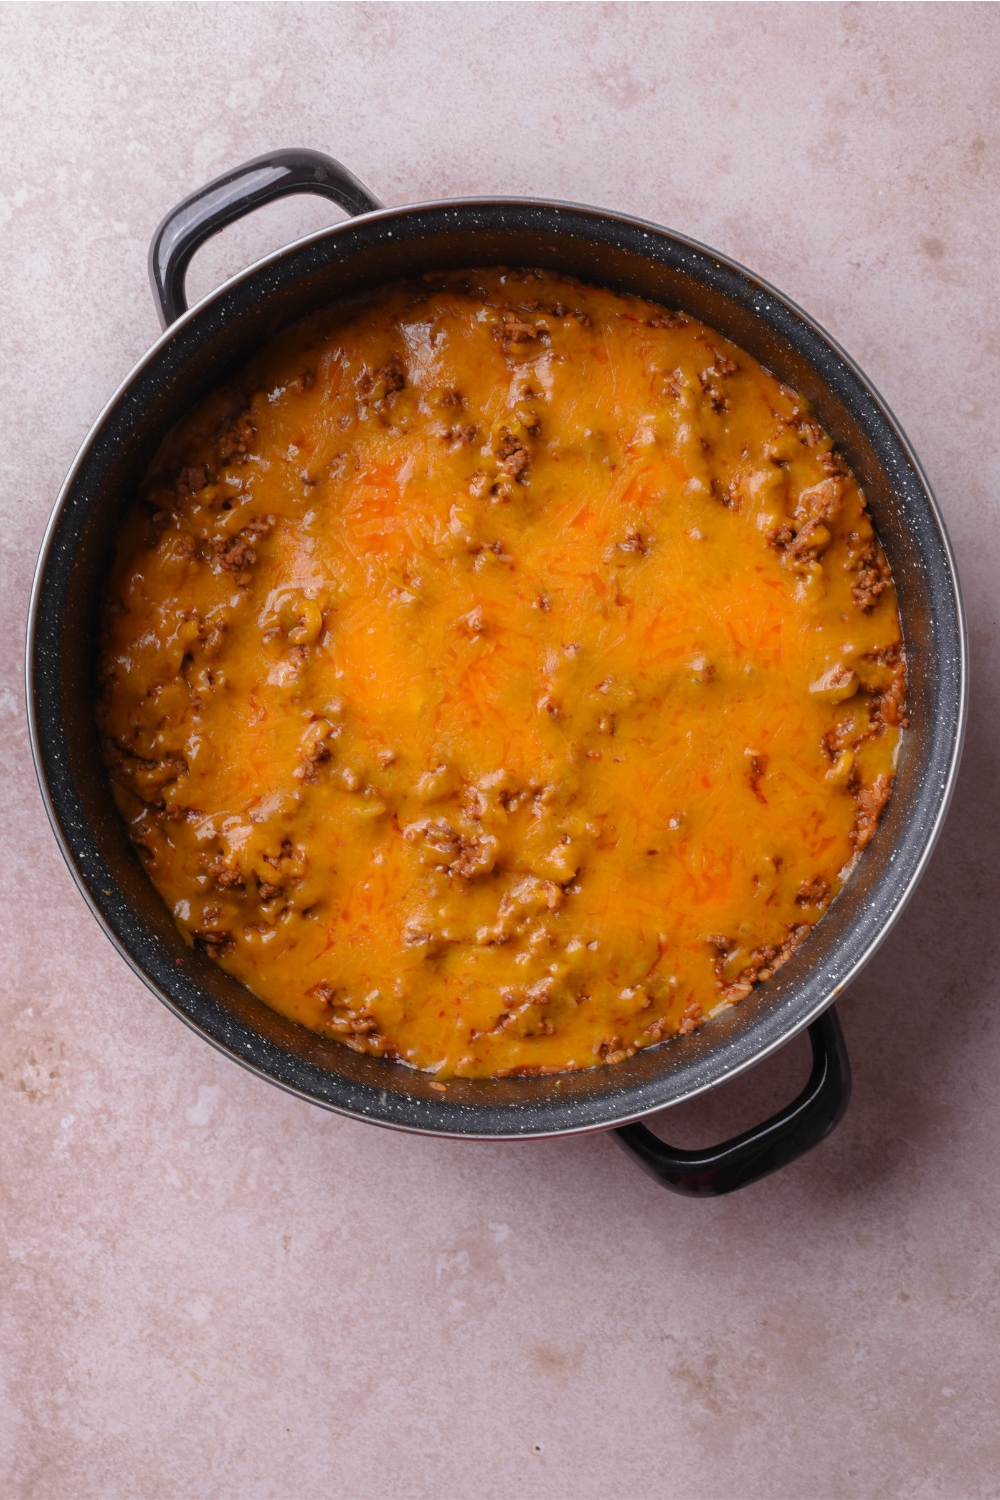 A skillet filled with cooked and seasoned ground beef covered in a layer of melted cheese.